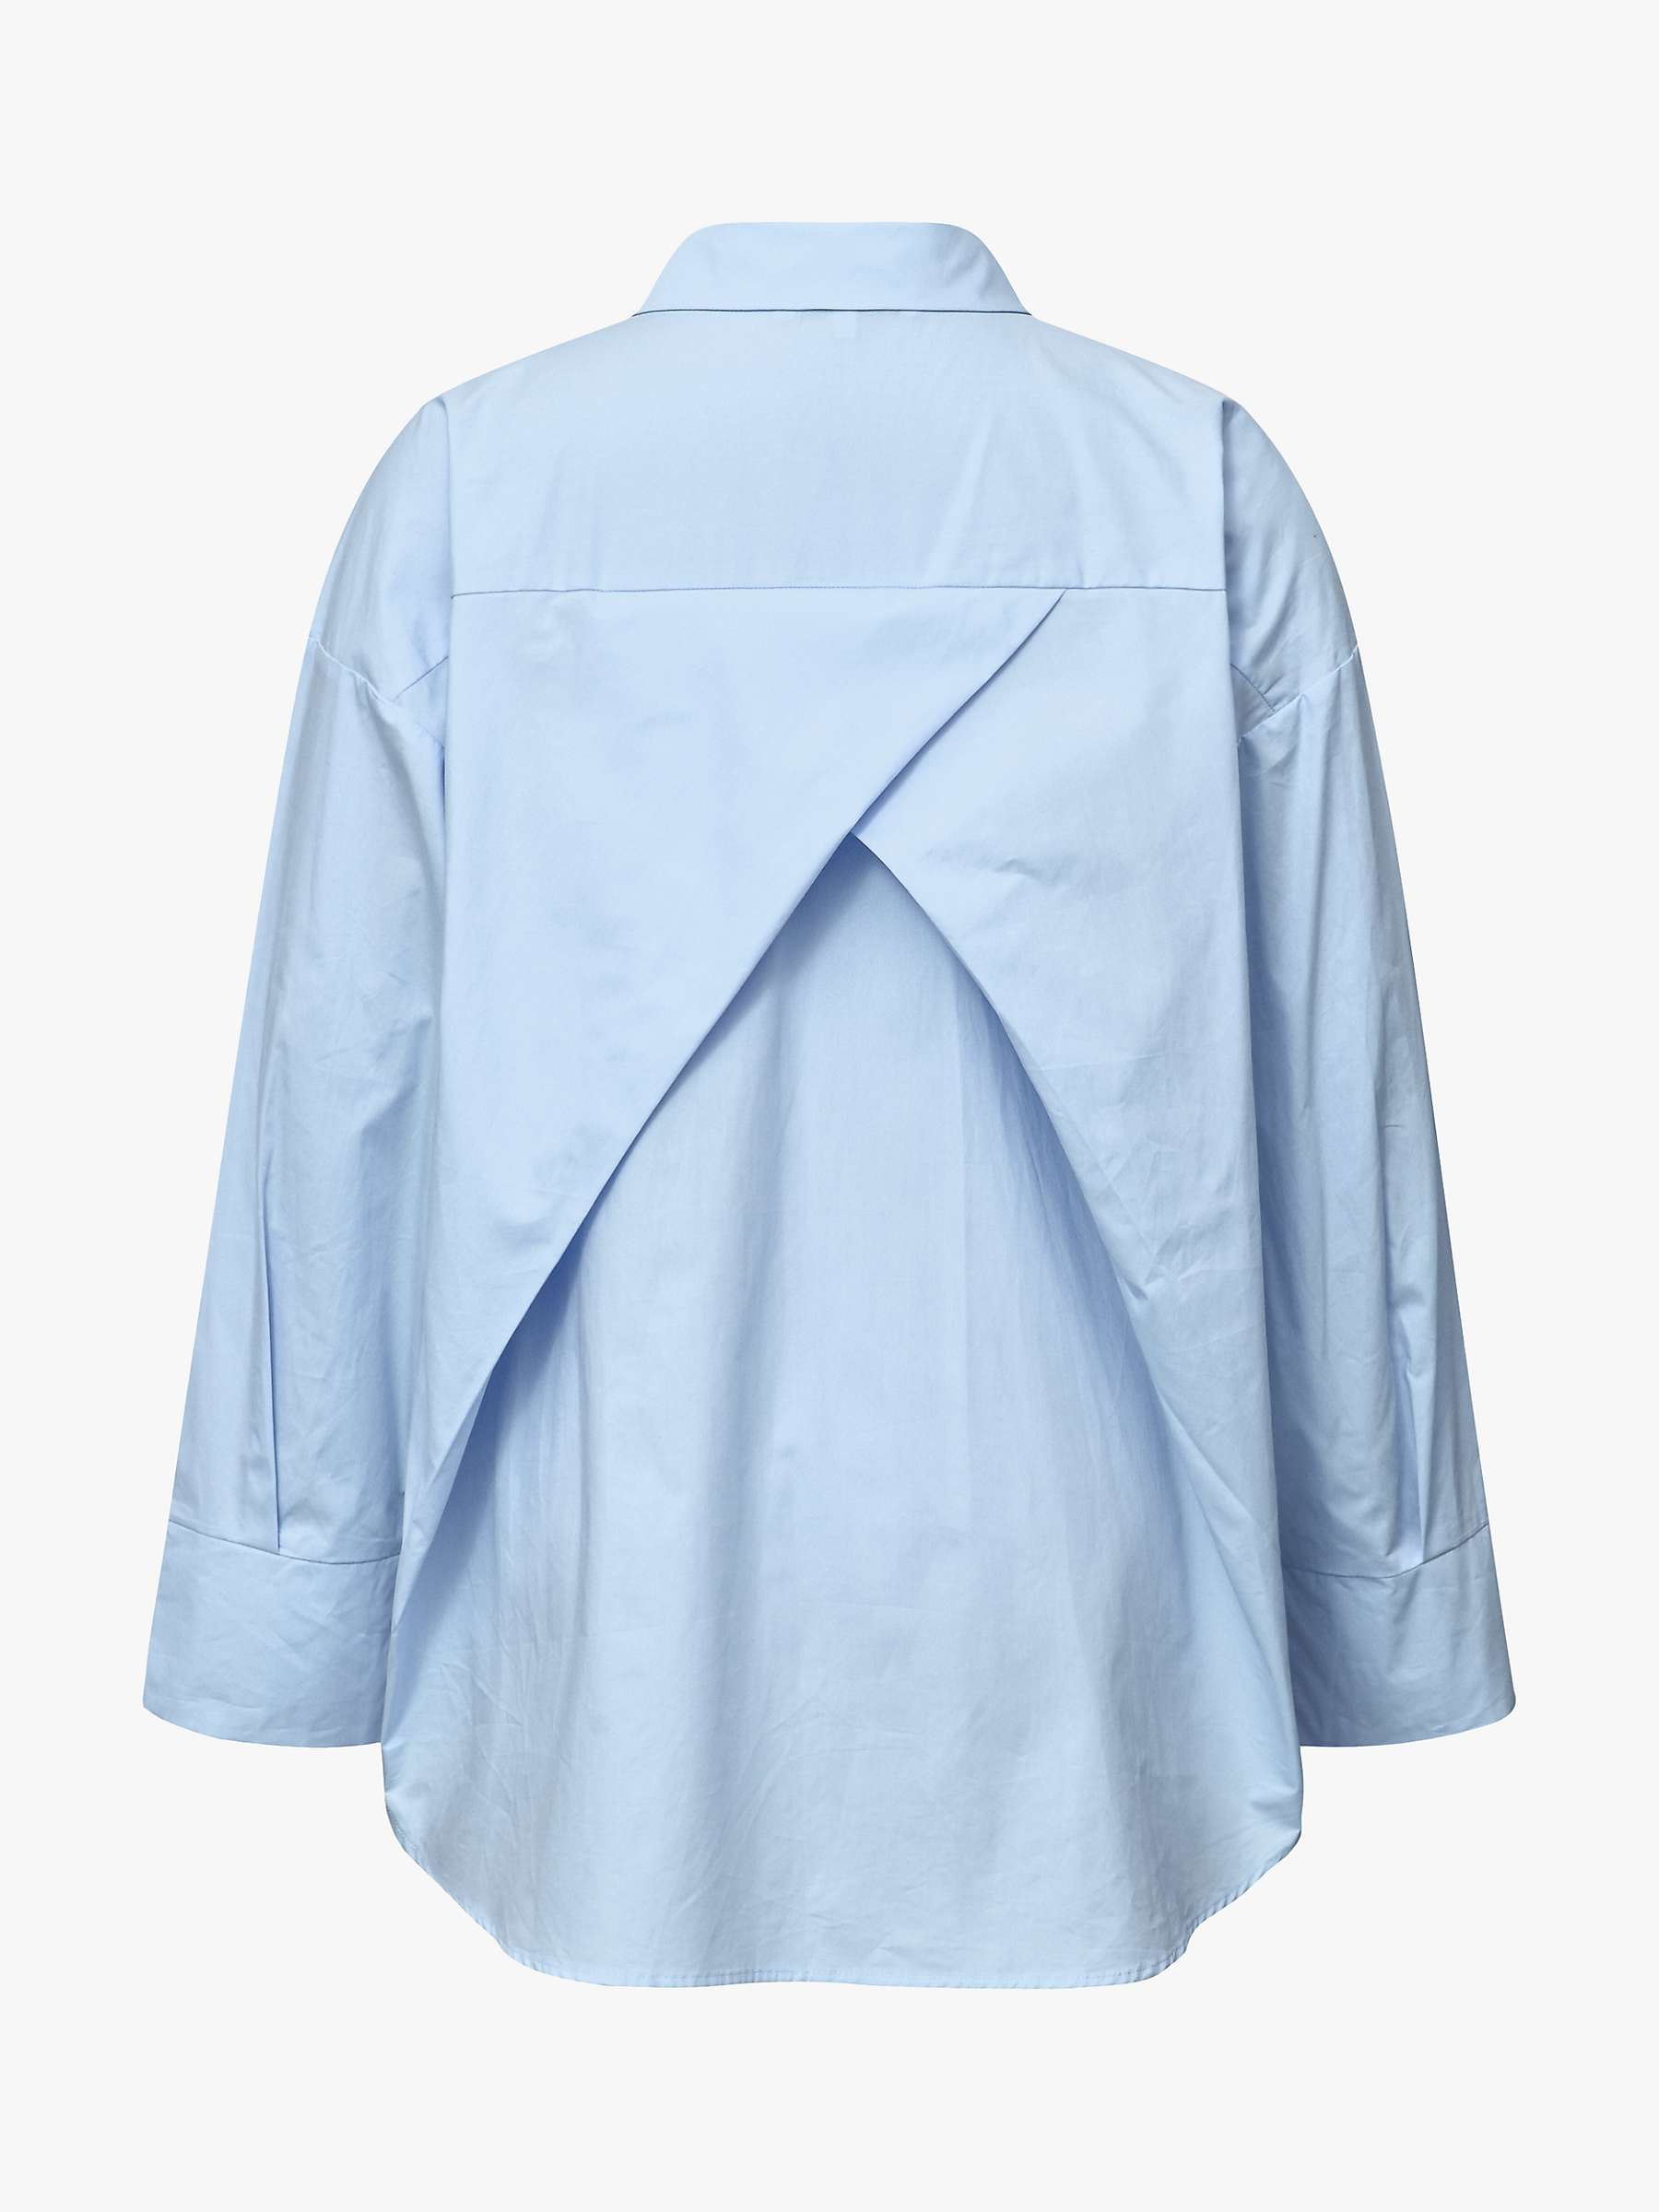 Buy A-VIEW Magnolia Cotton Loose Shirt Online at johnlewis.com